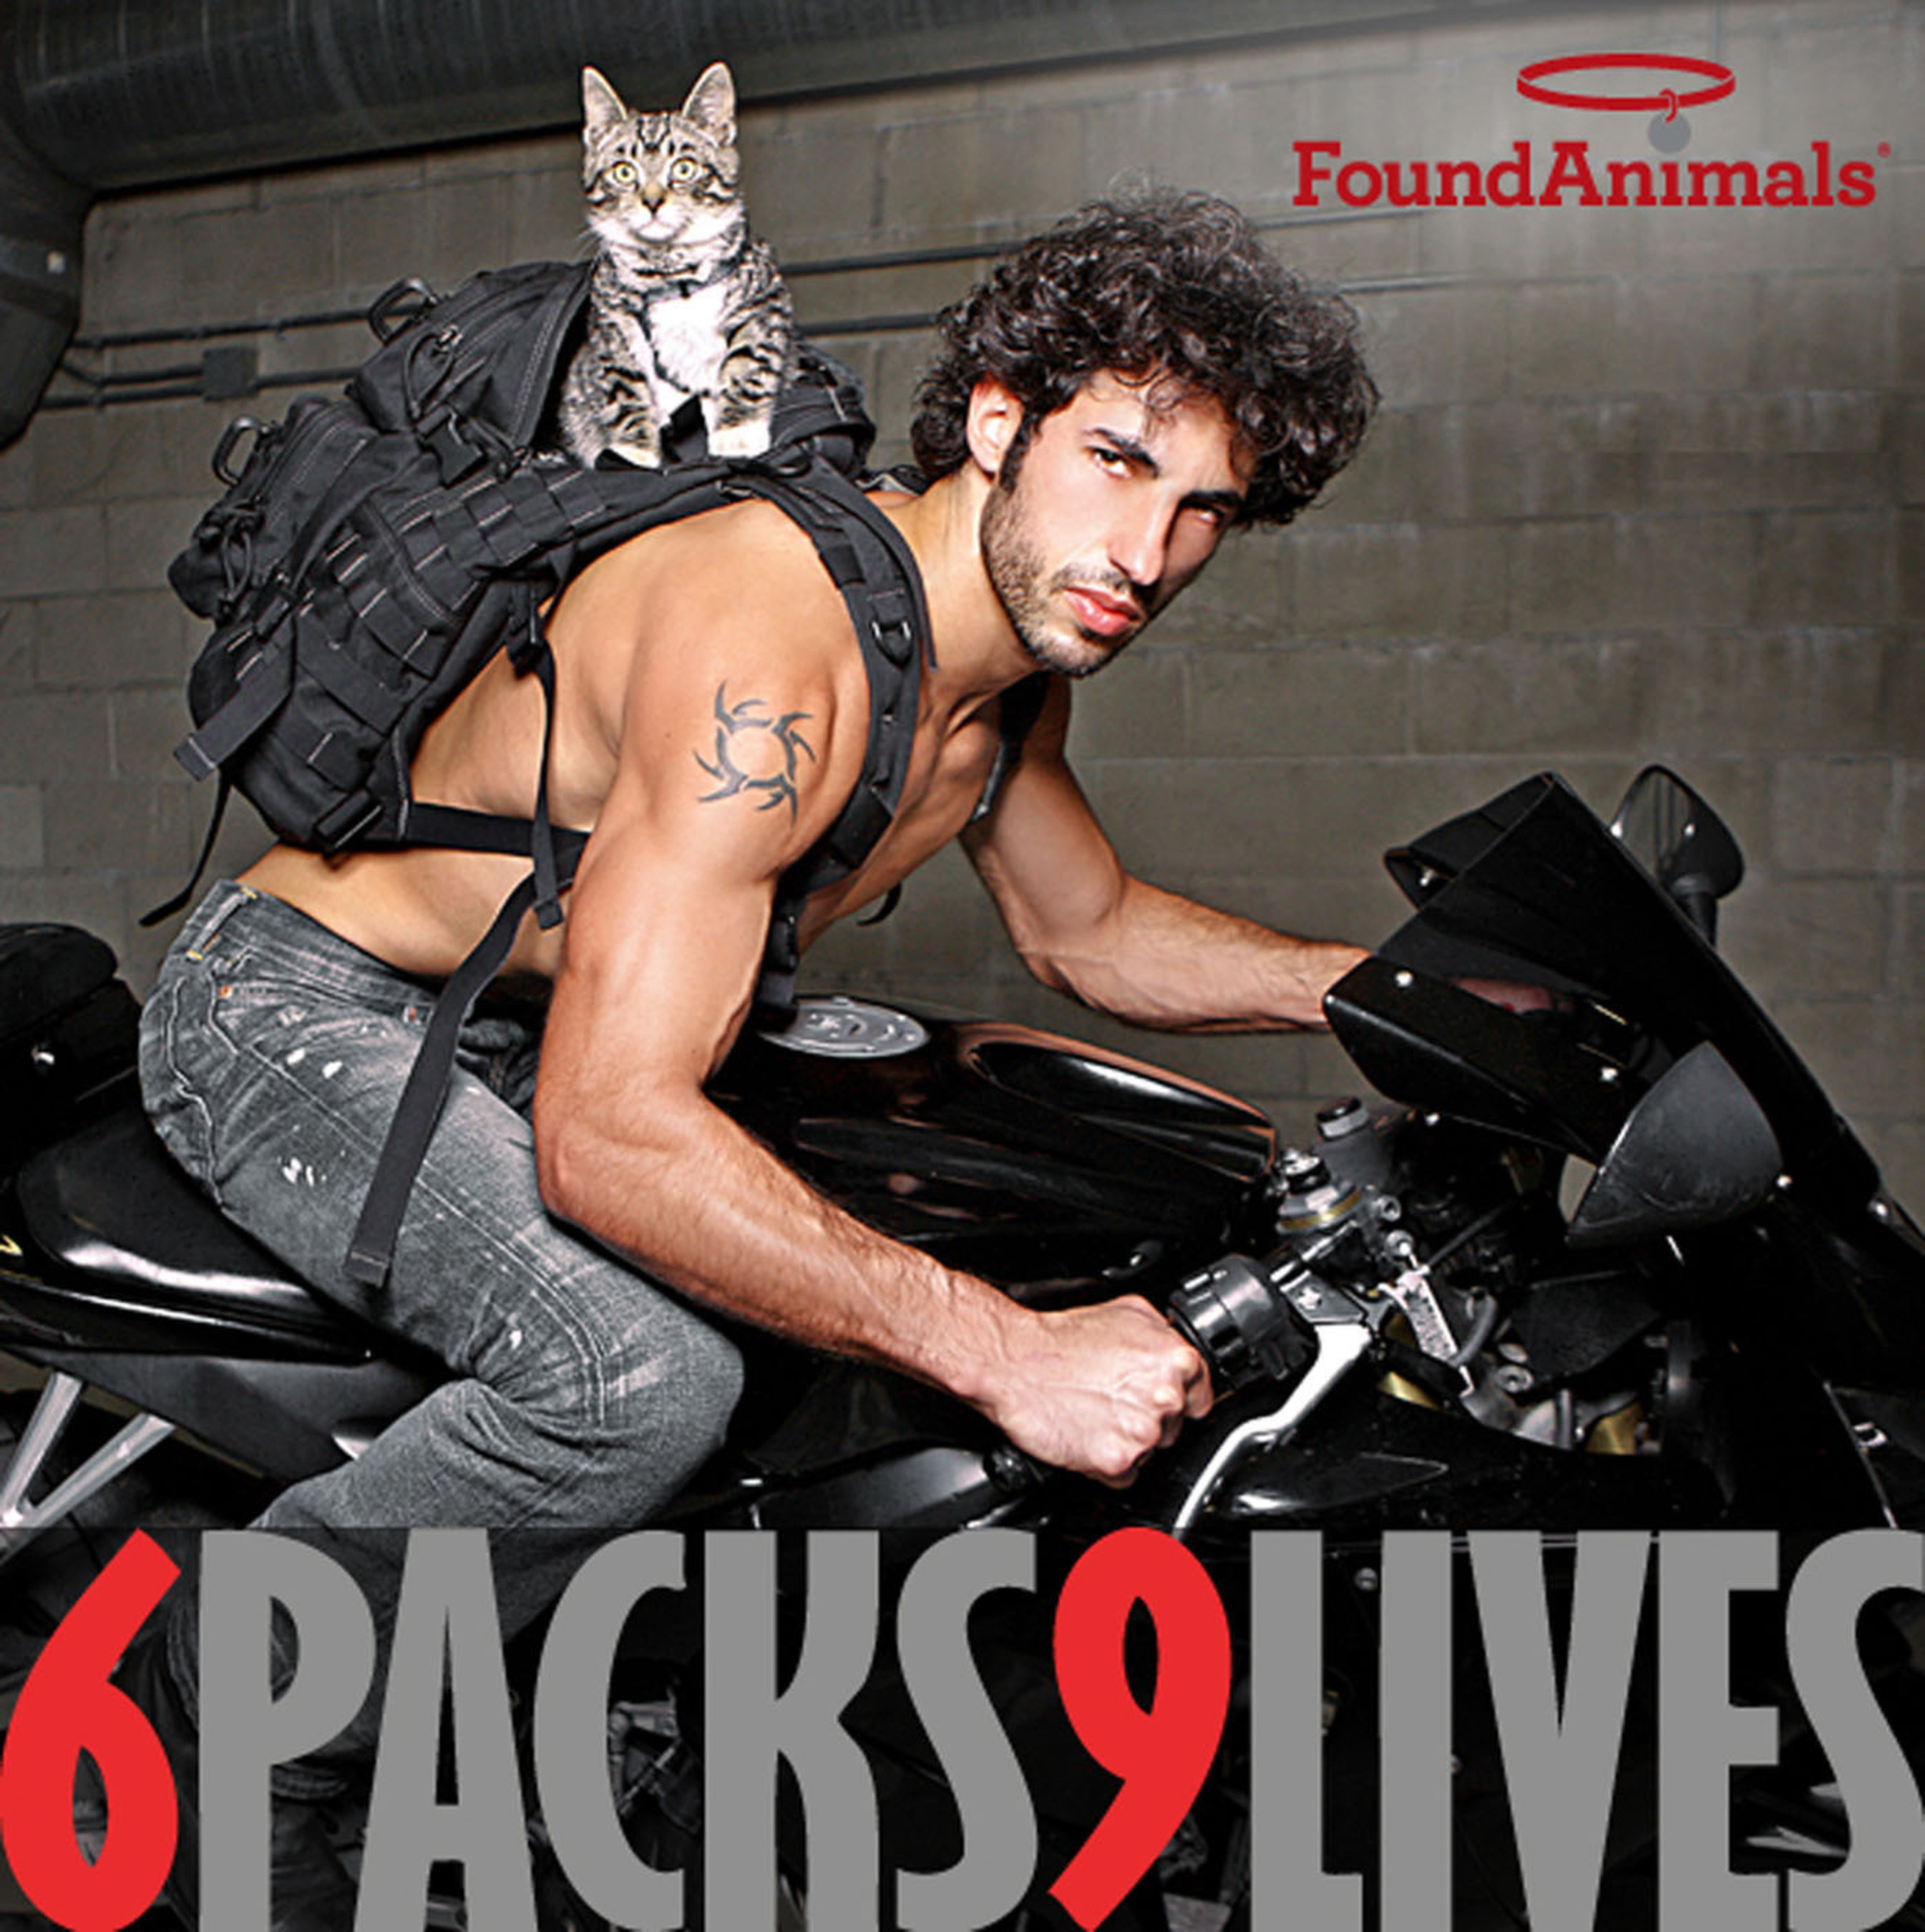 Kitsch for a Cause: Found Animals Launches Unconventional Calendar to  Promote Cat Adoption